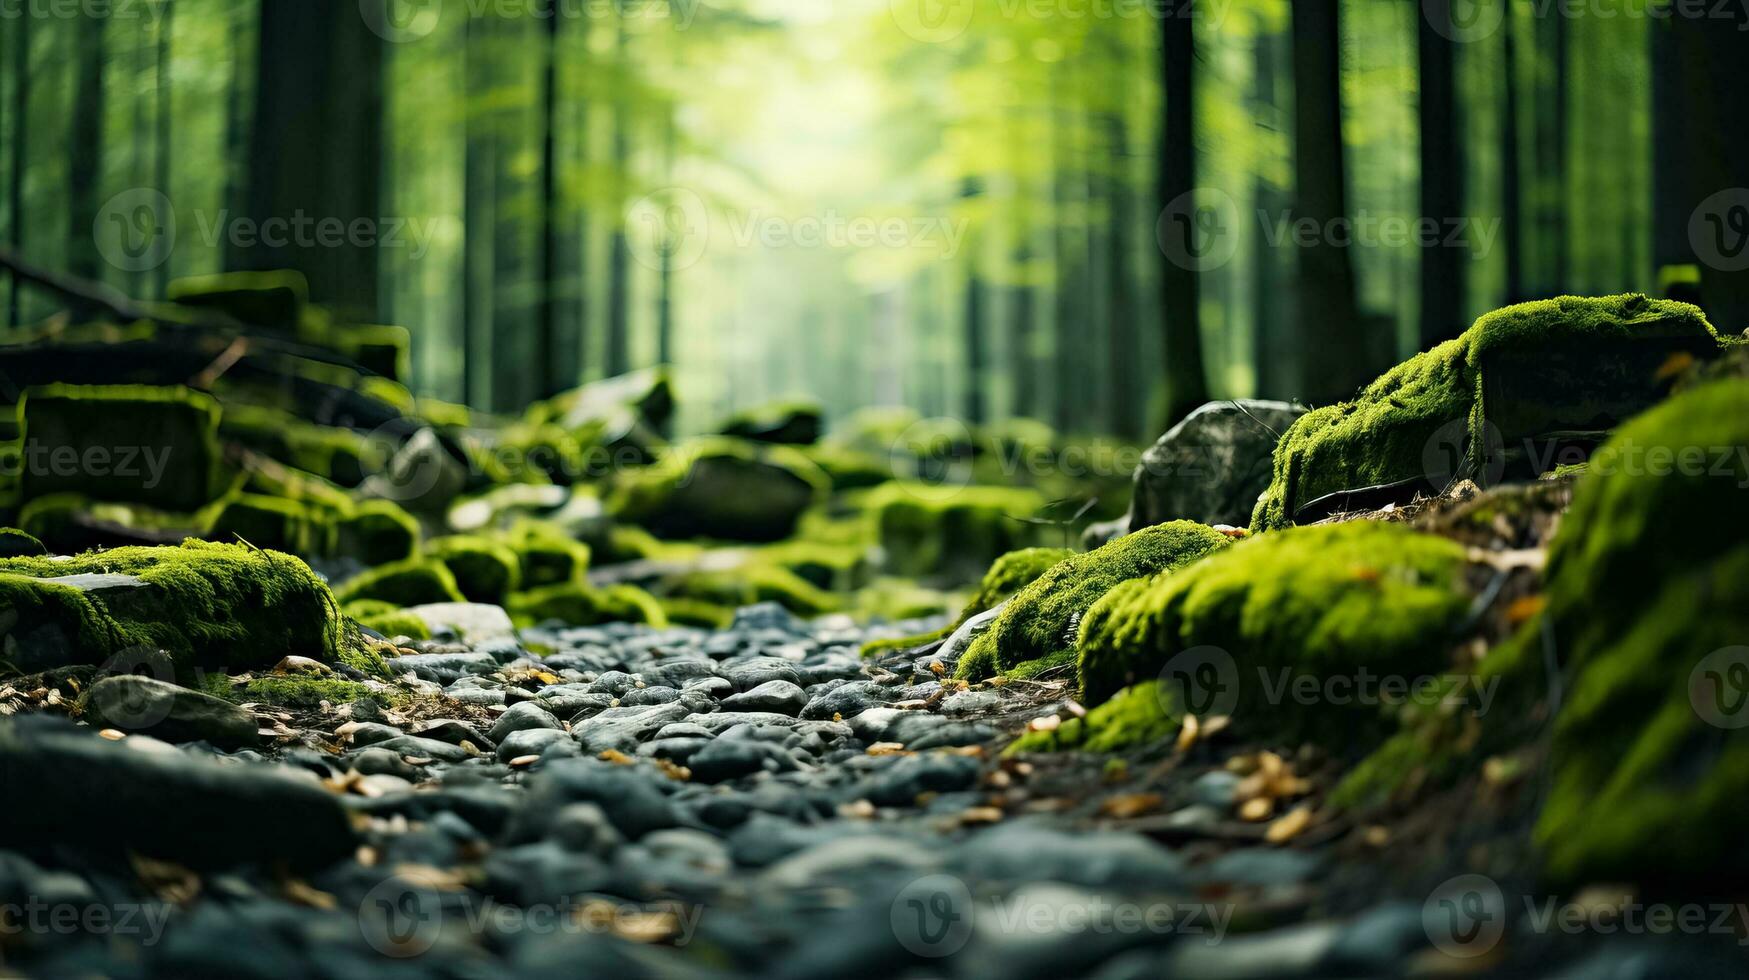 A picturesque forest scene with fallen leaves and moss-covered rocks background with empty space for text photo